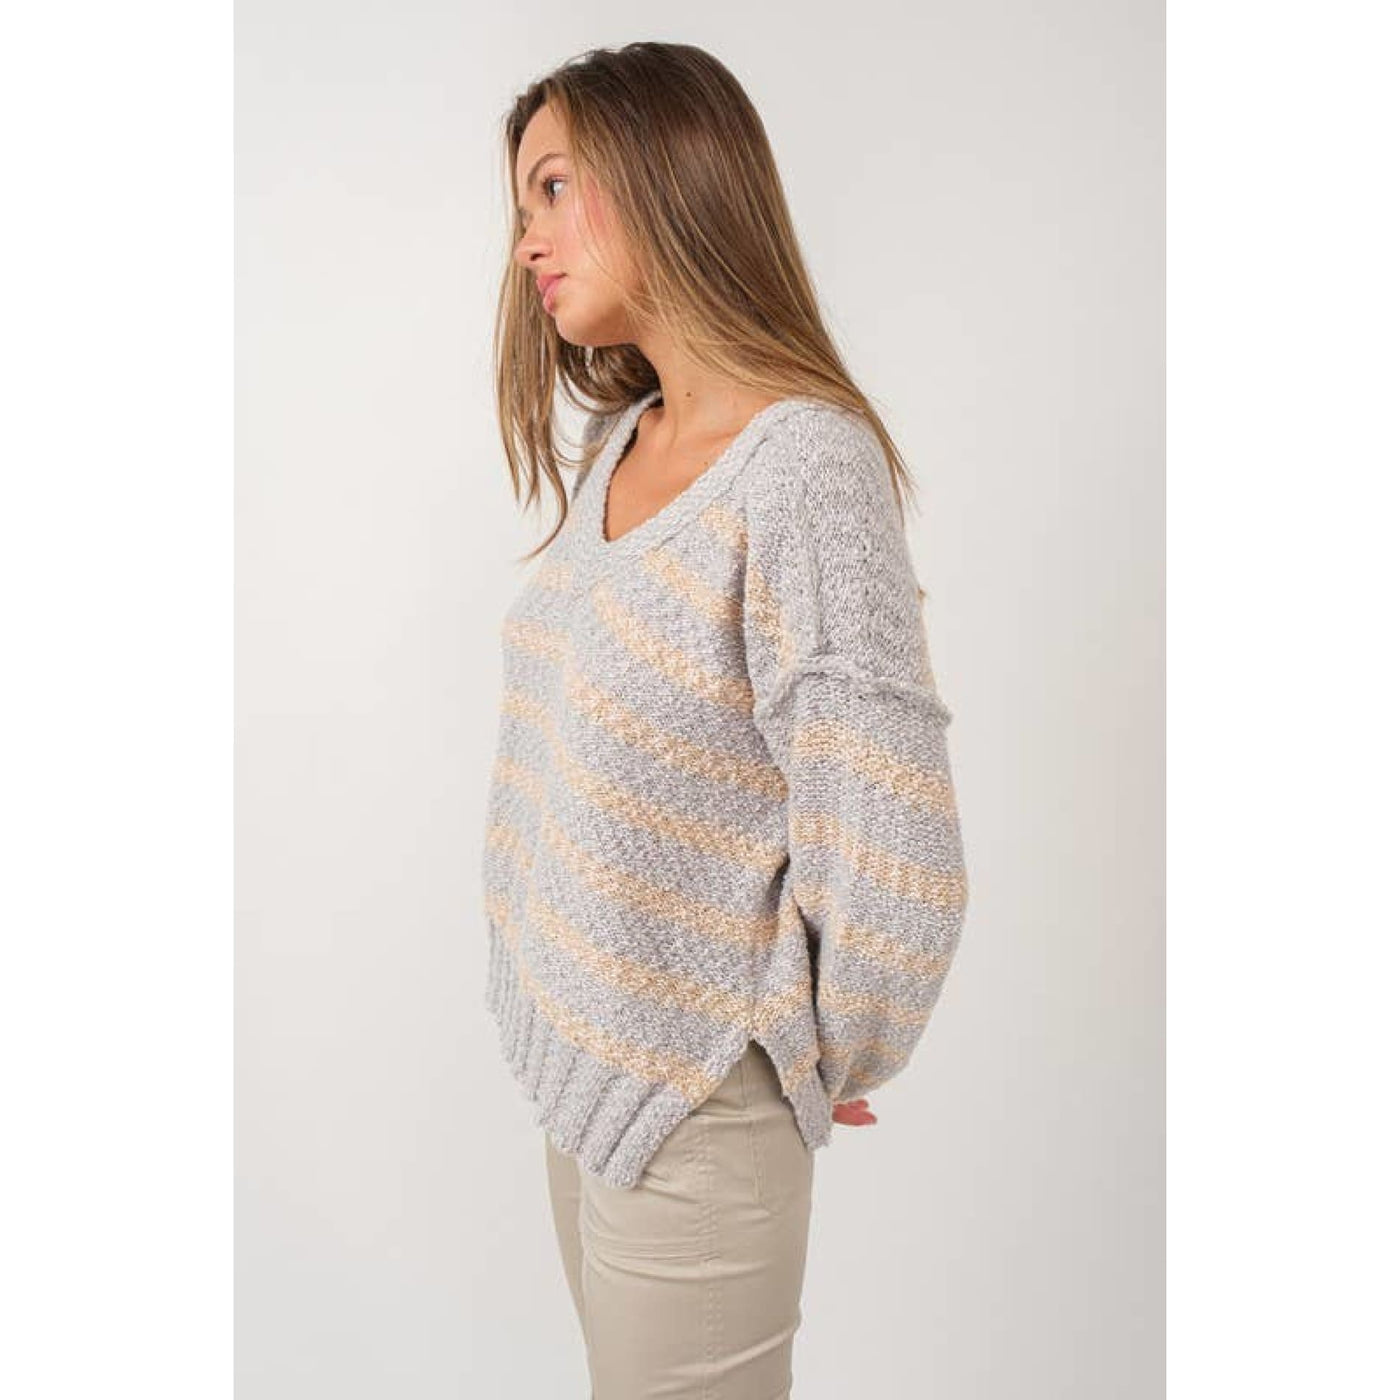 While You Dream Striped Sweater - 130 Sweaters/Cardigans